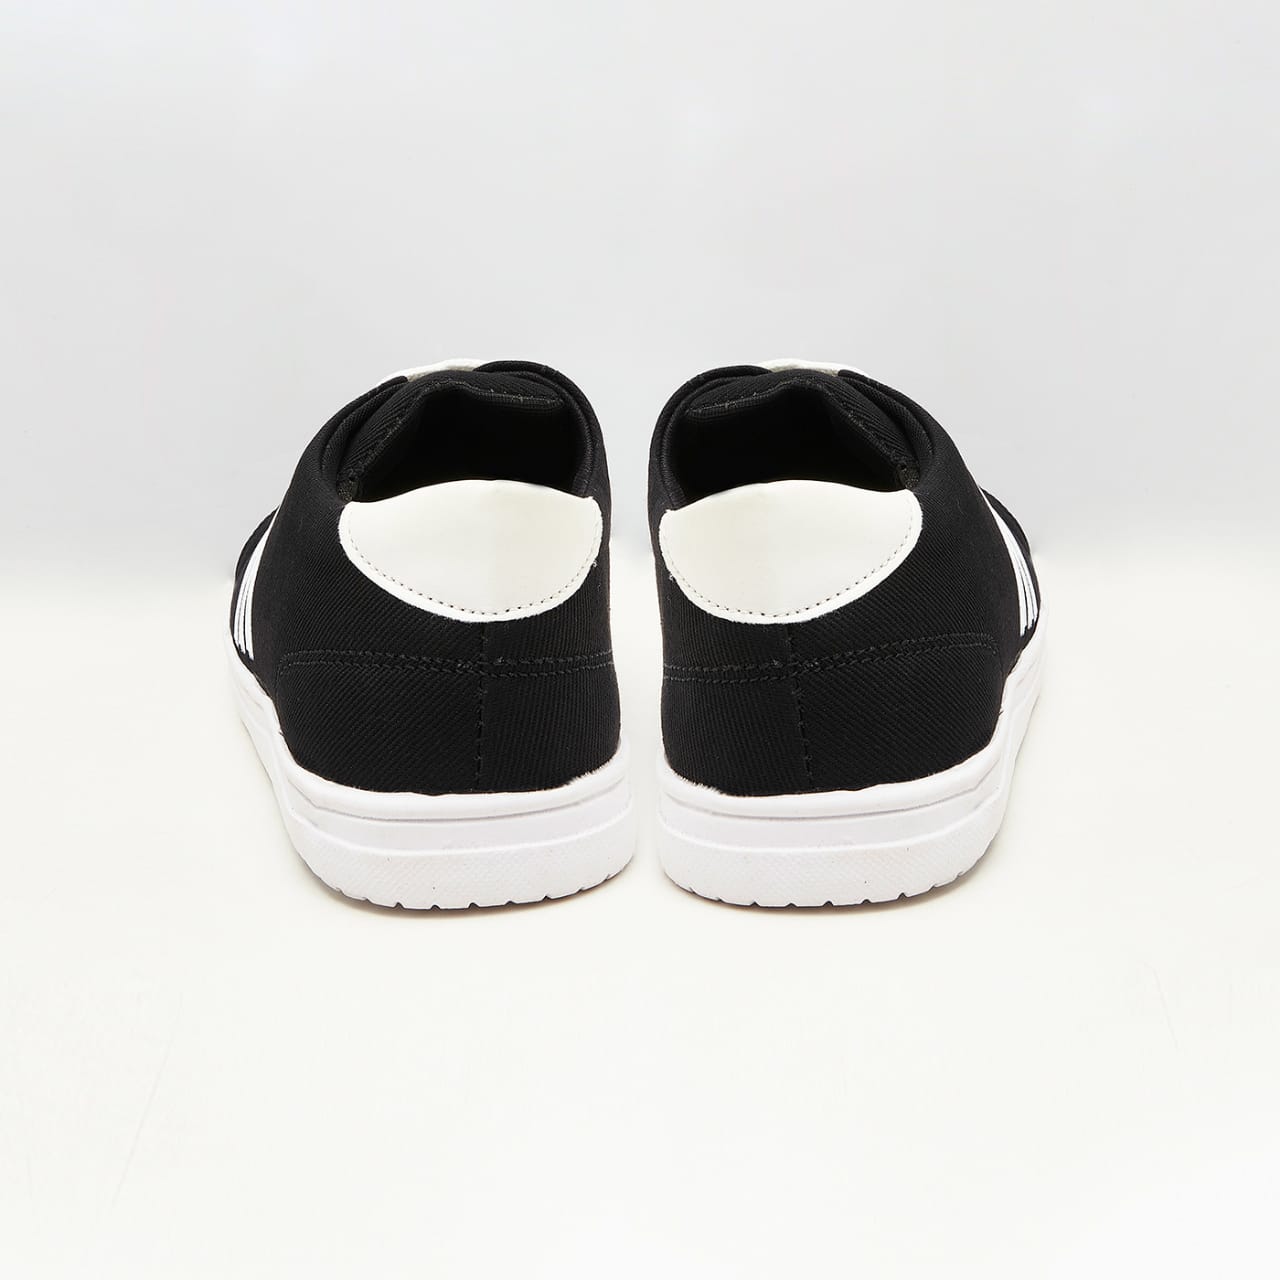 Mens Black Sneakers Shoes with White Lines 003